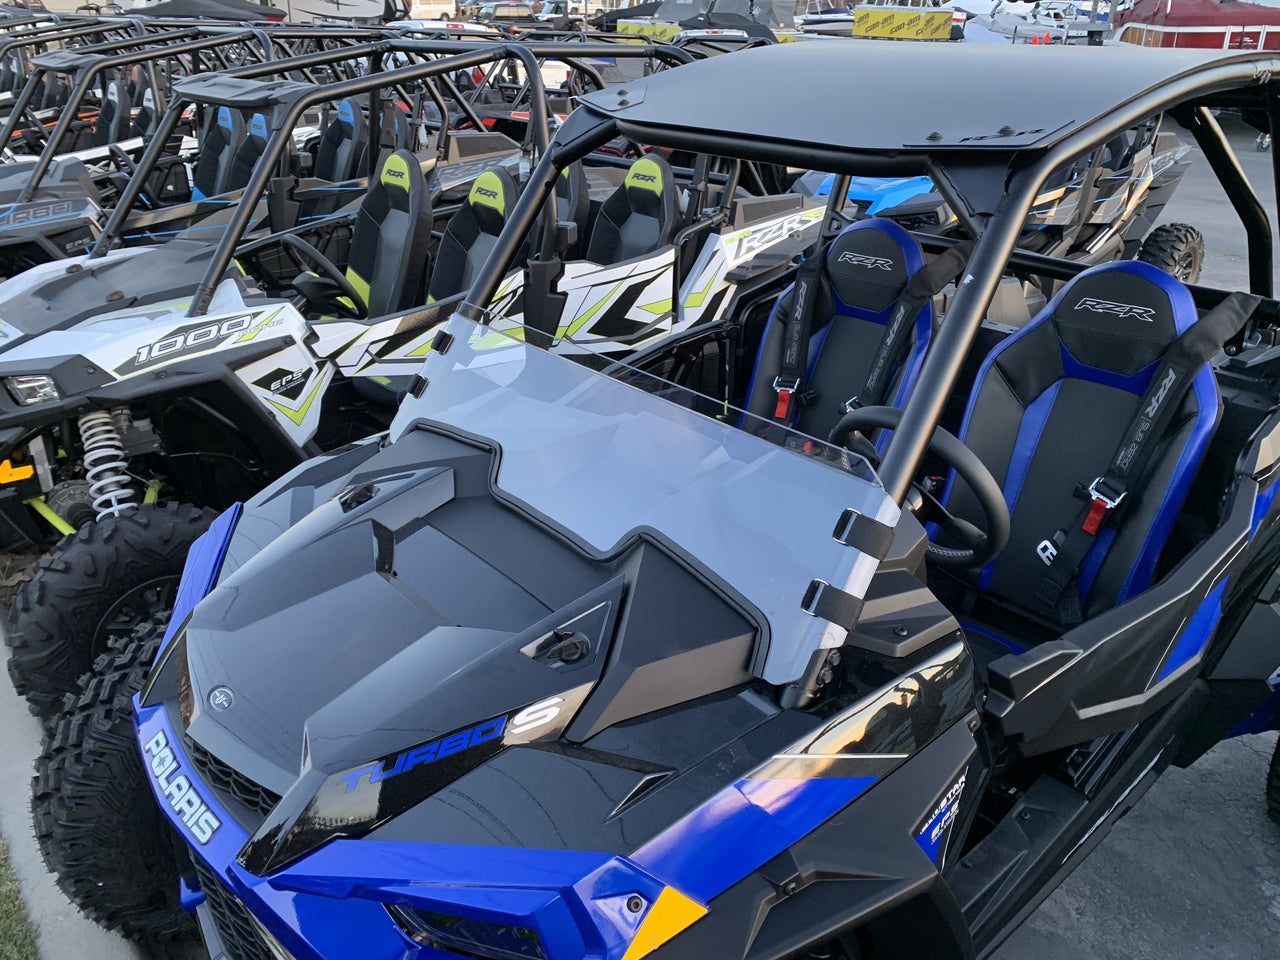 Polycarbonate Clear Half Windshield with Quick Straps for RZR Turbo S and 2019+ RZR 1000, Turbo